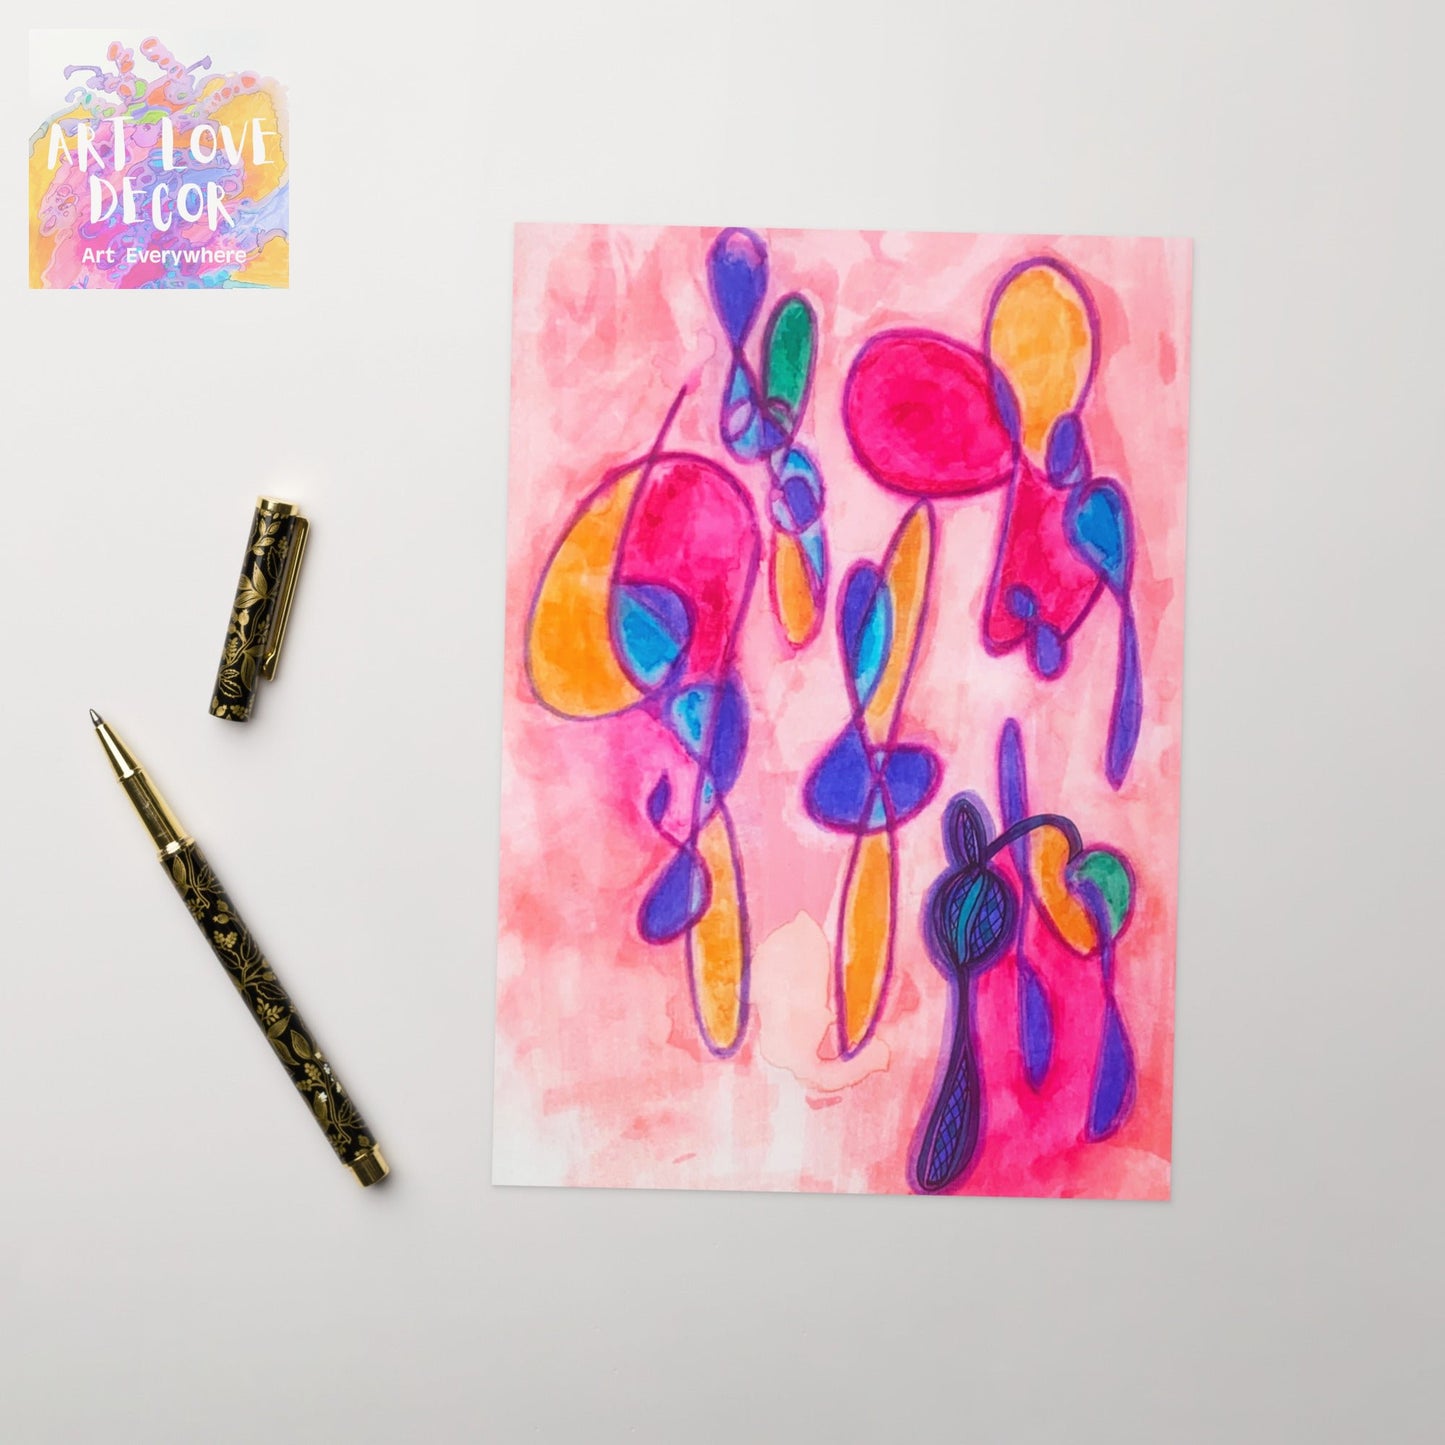 Treble Clef Abstract Greeting card - Art Love Decor